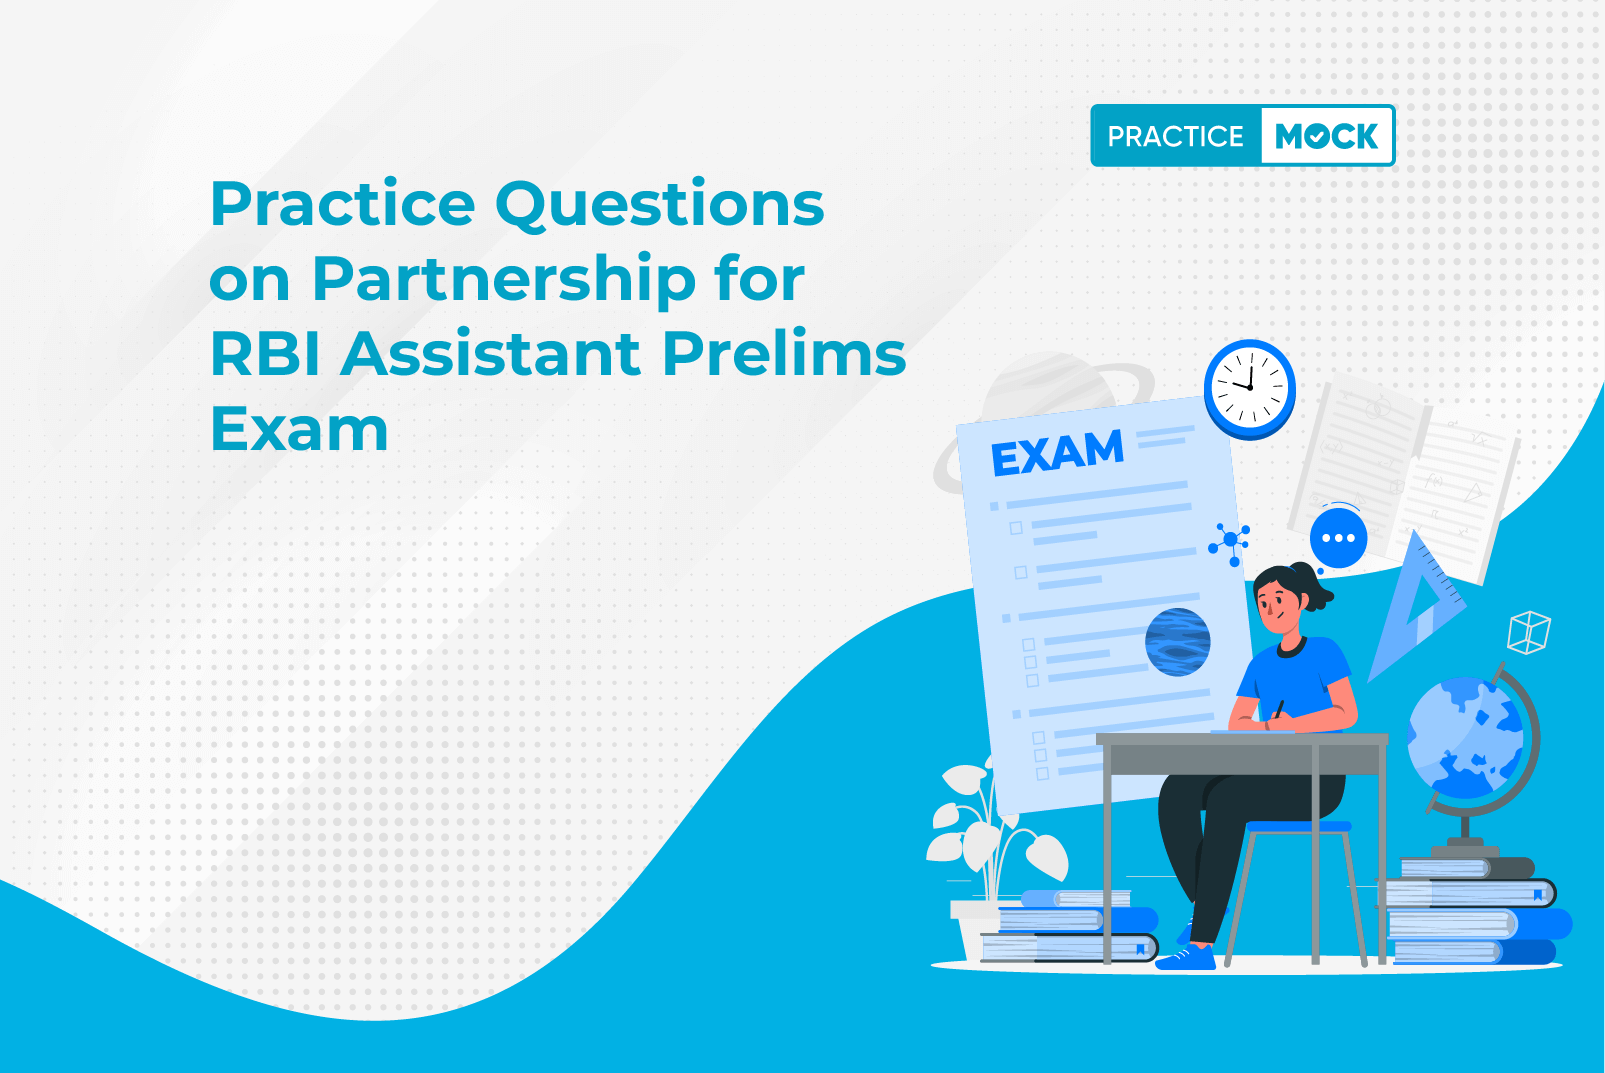 Practice Questions on Partnership for RBI Assistant Prelims Exam